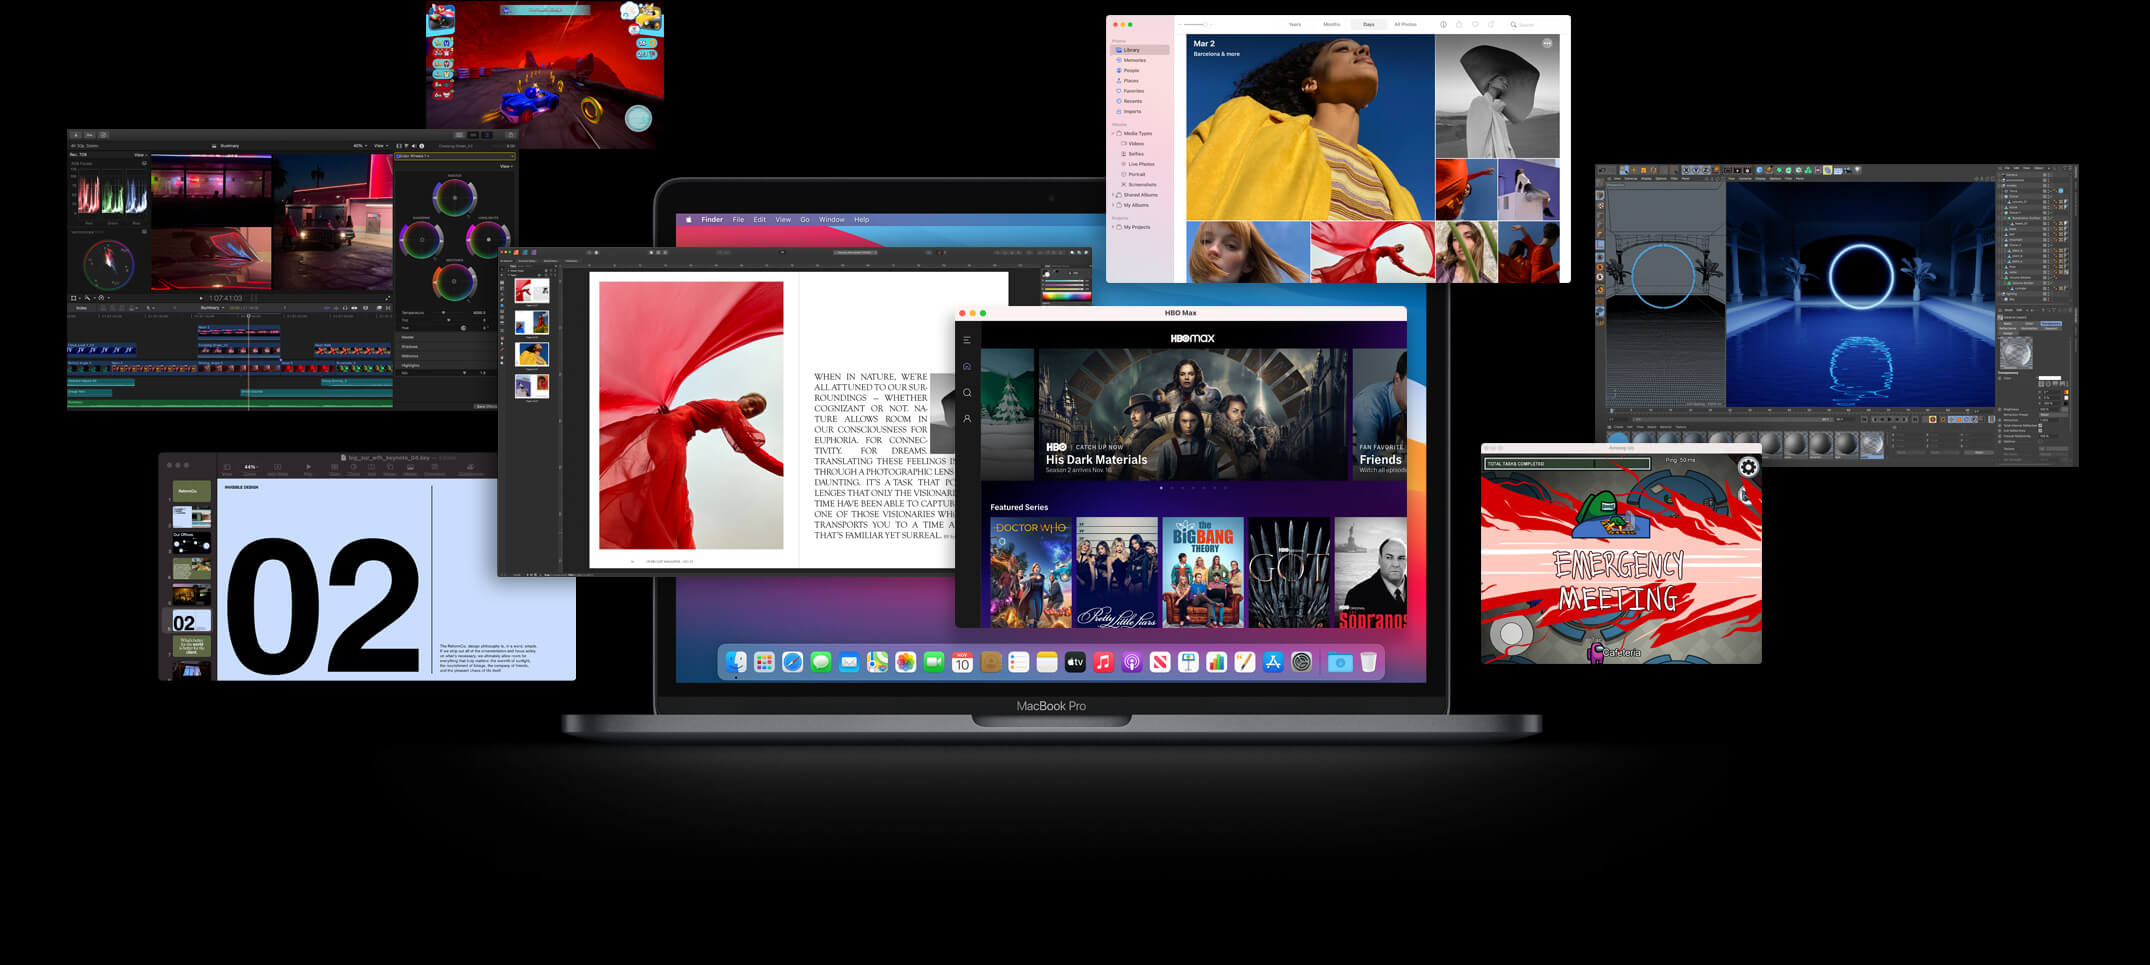 M1 brings more apps to Mac than ever.